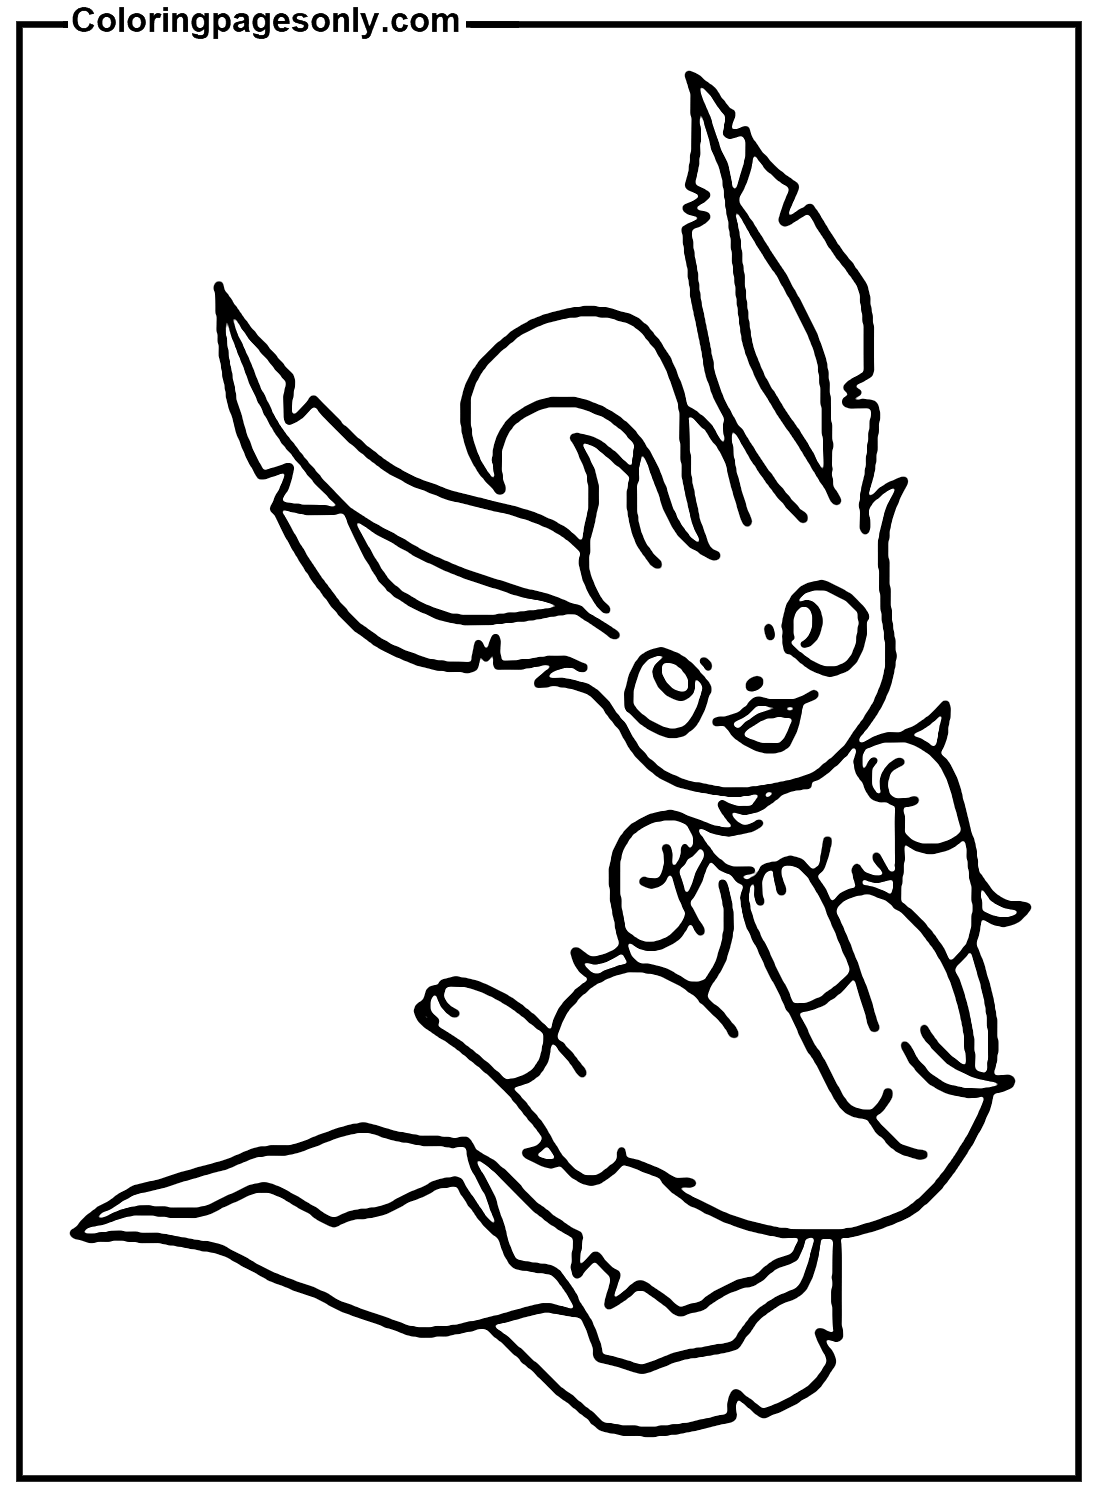 Cute Leafeon from Leafeon